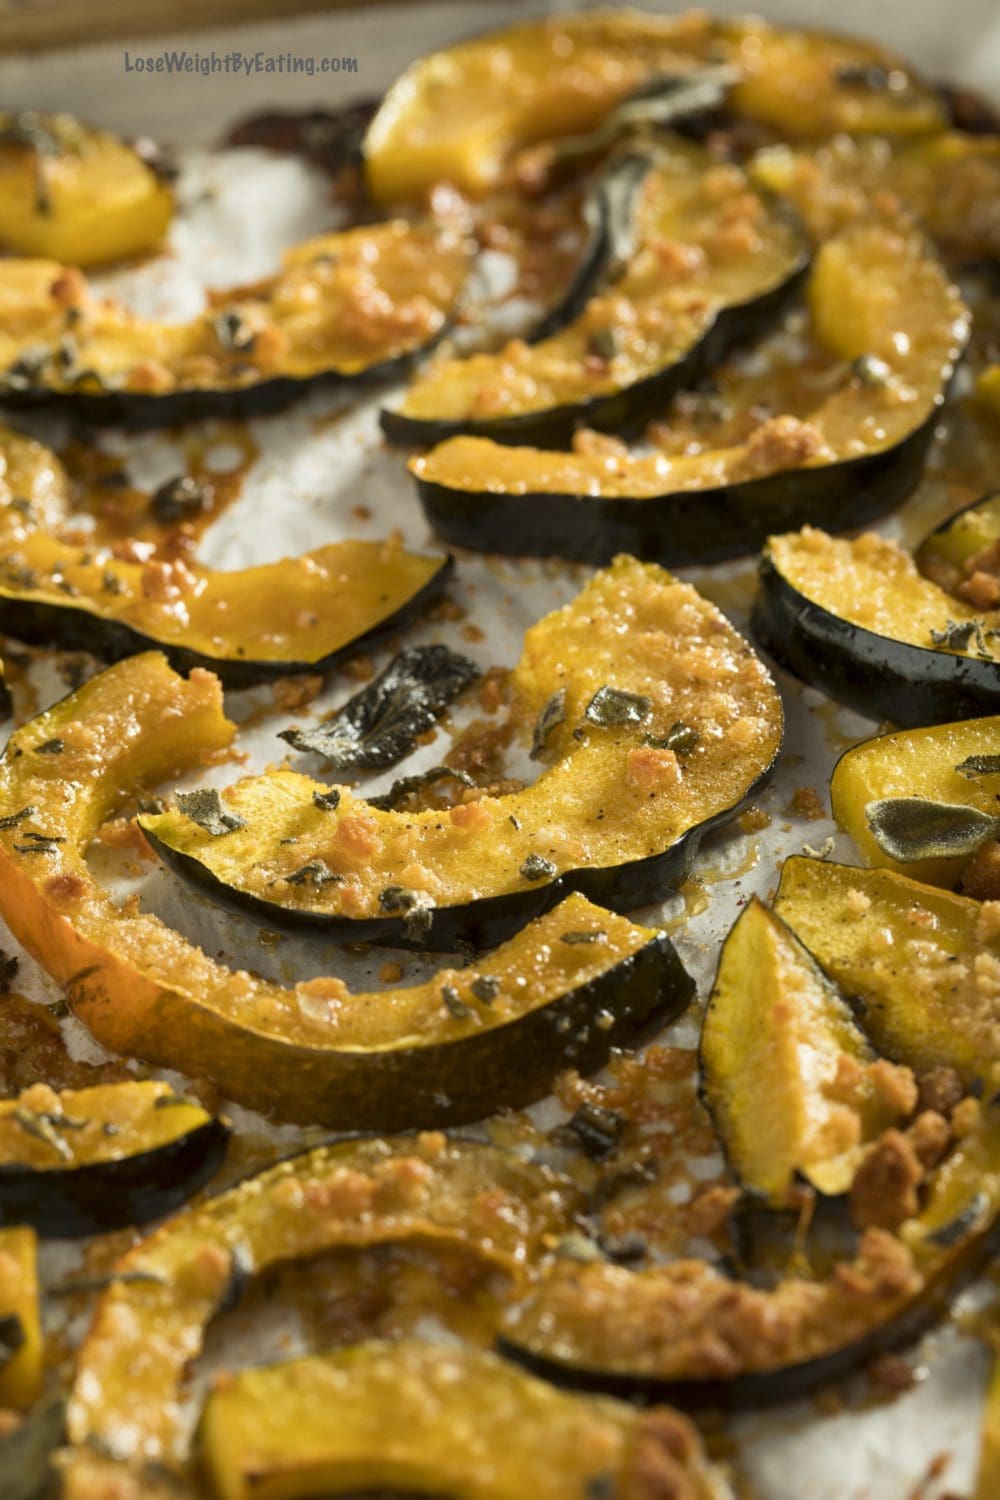 Easy Recipe for Acorn Squash in the Oven